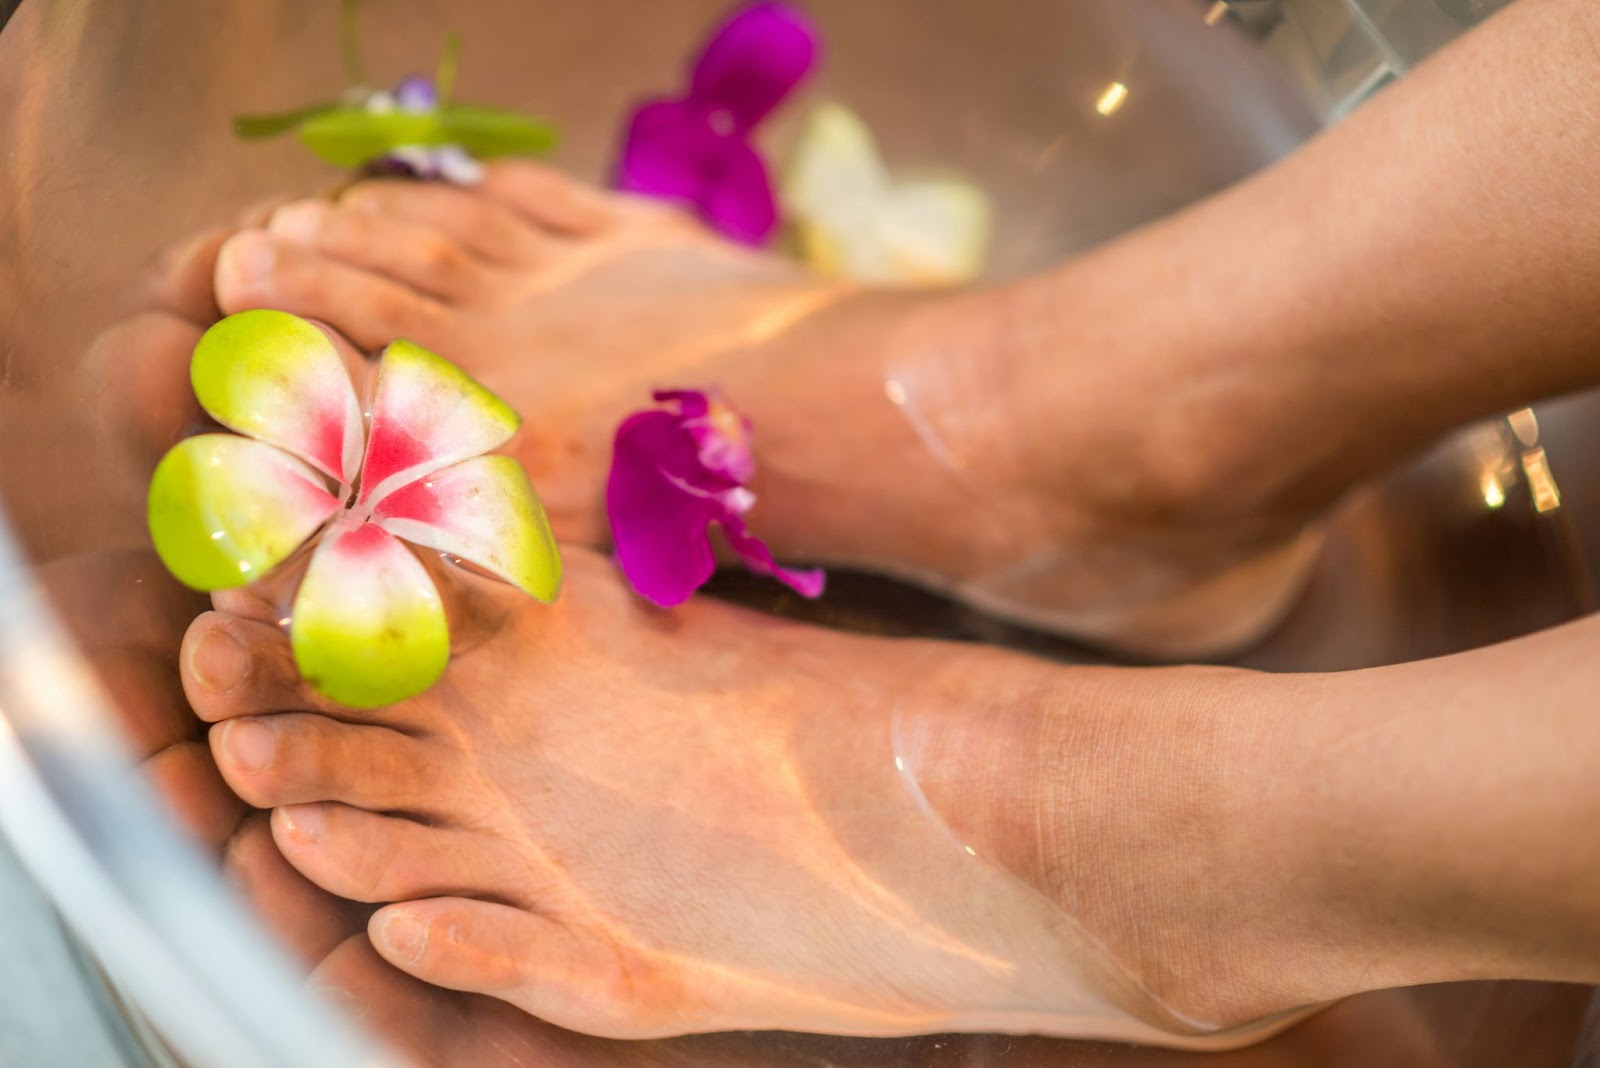 A close-up image of a relaxing and rejuvenating pedicure